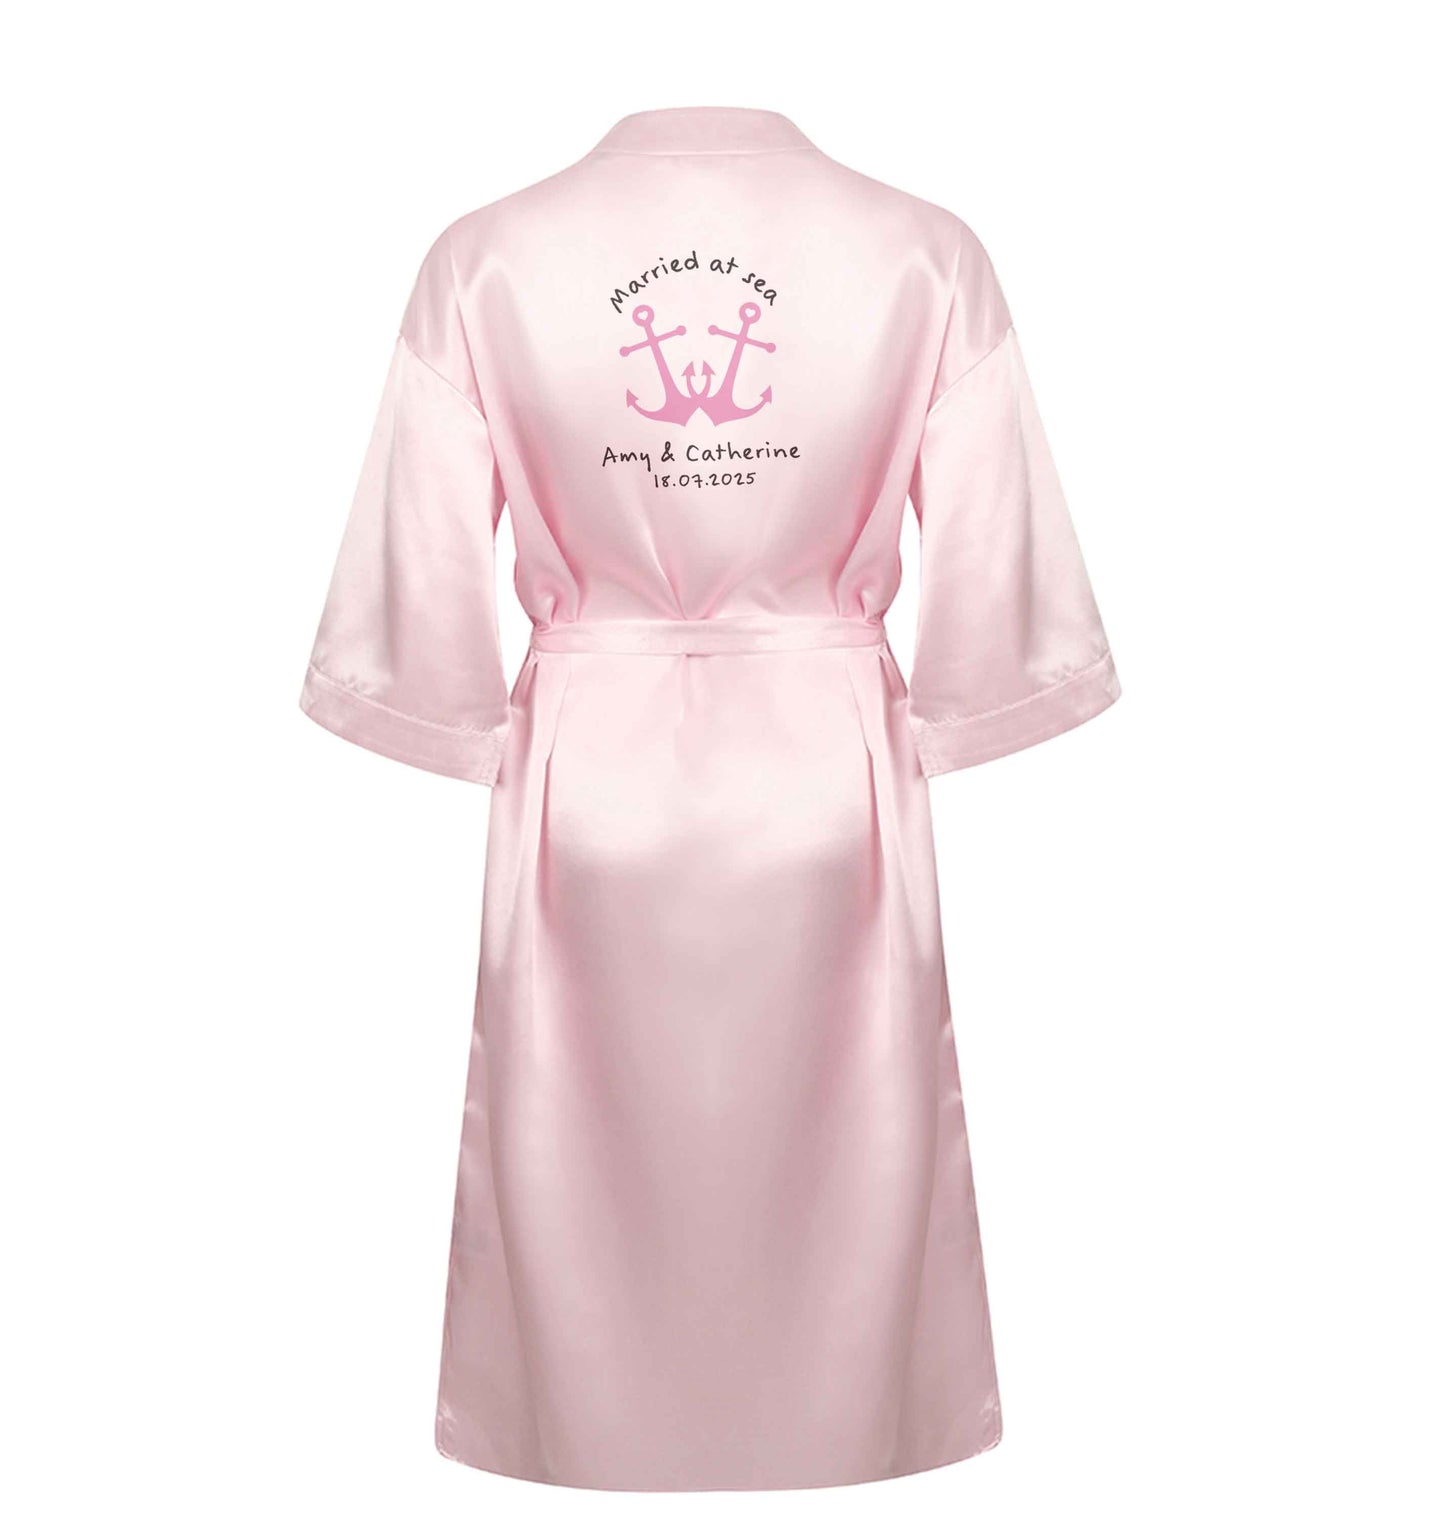 Married at sea pink anchors XL/XXL pink ladies dressing gown size 16/18